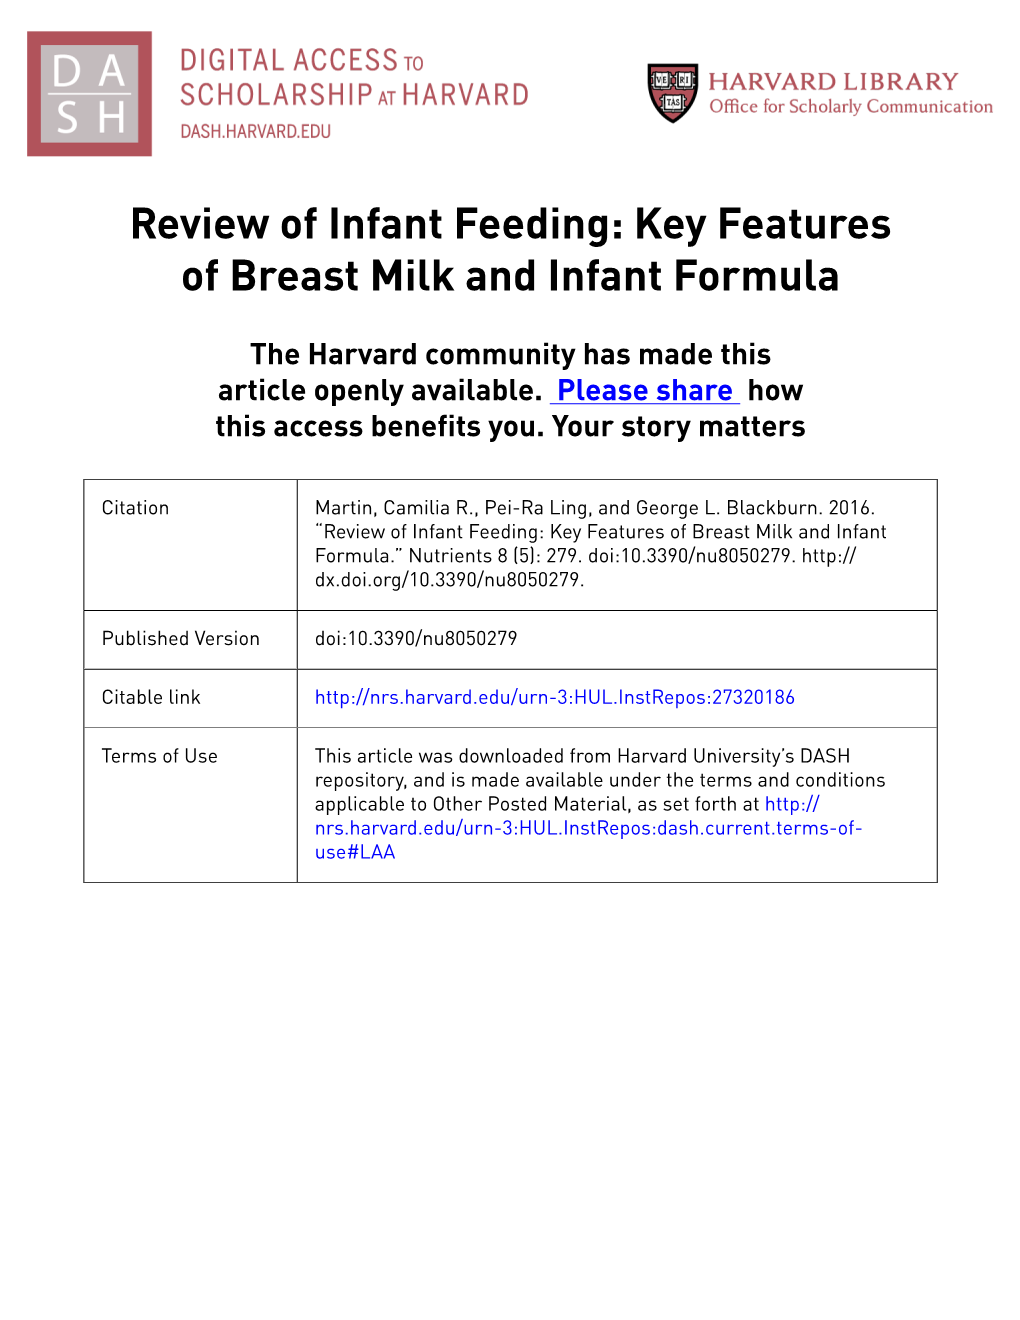 Key Features of Breast Milk and Infant Formula